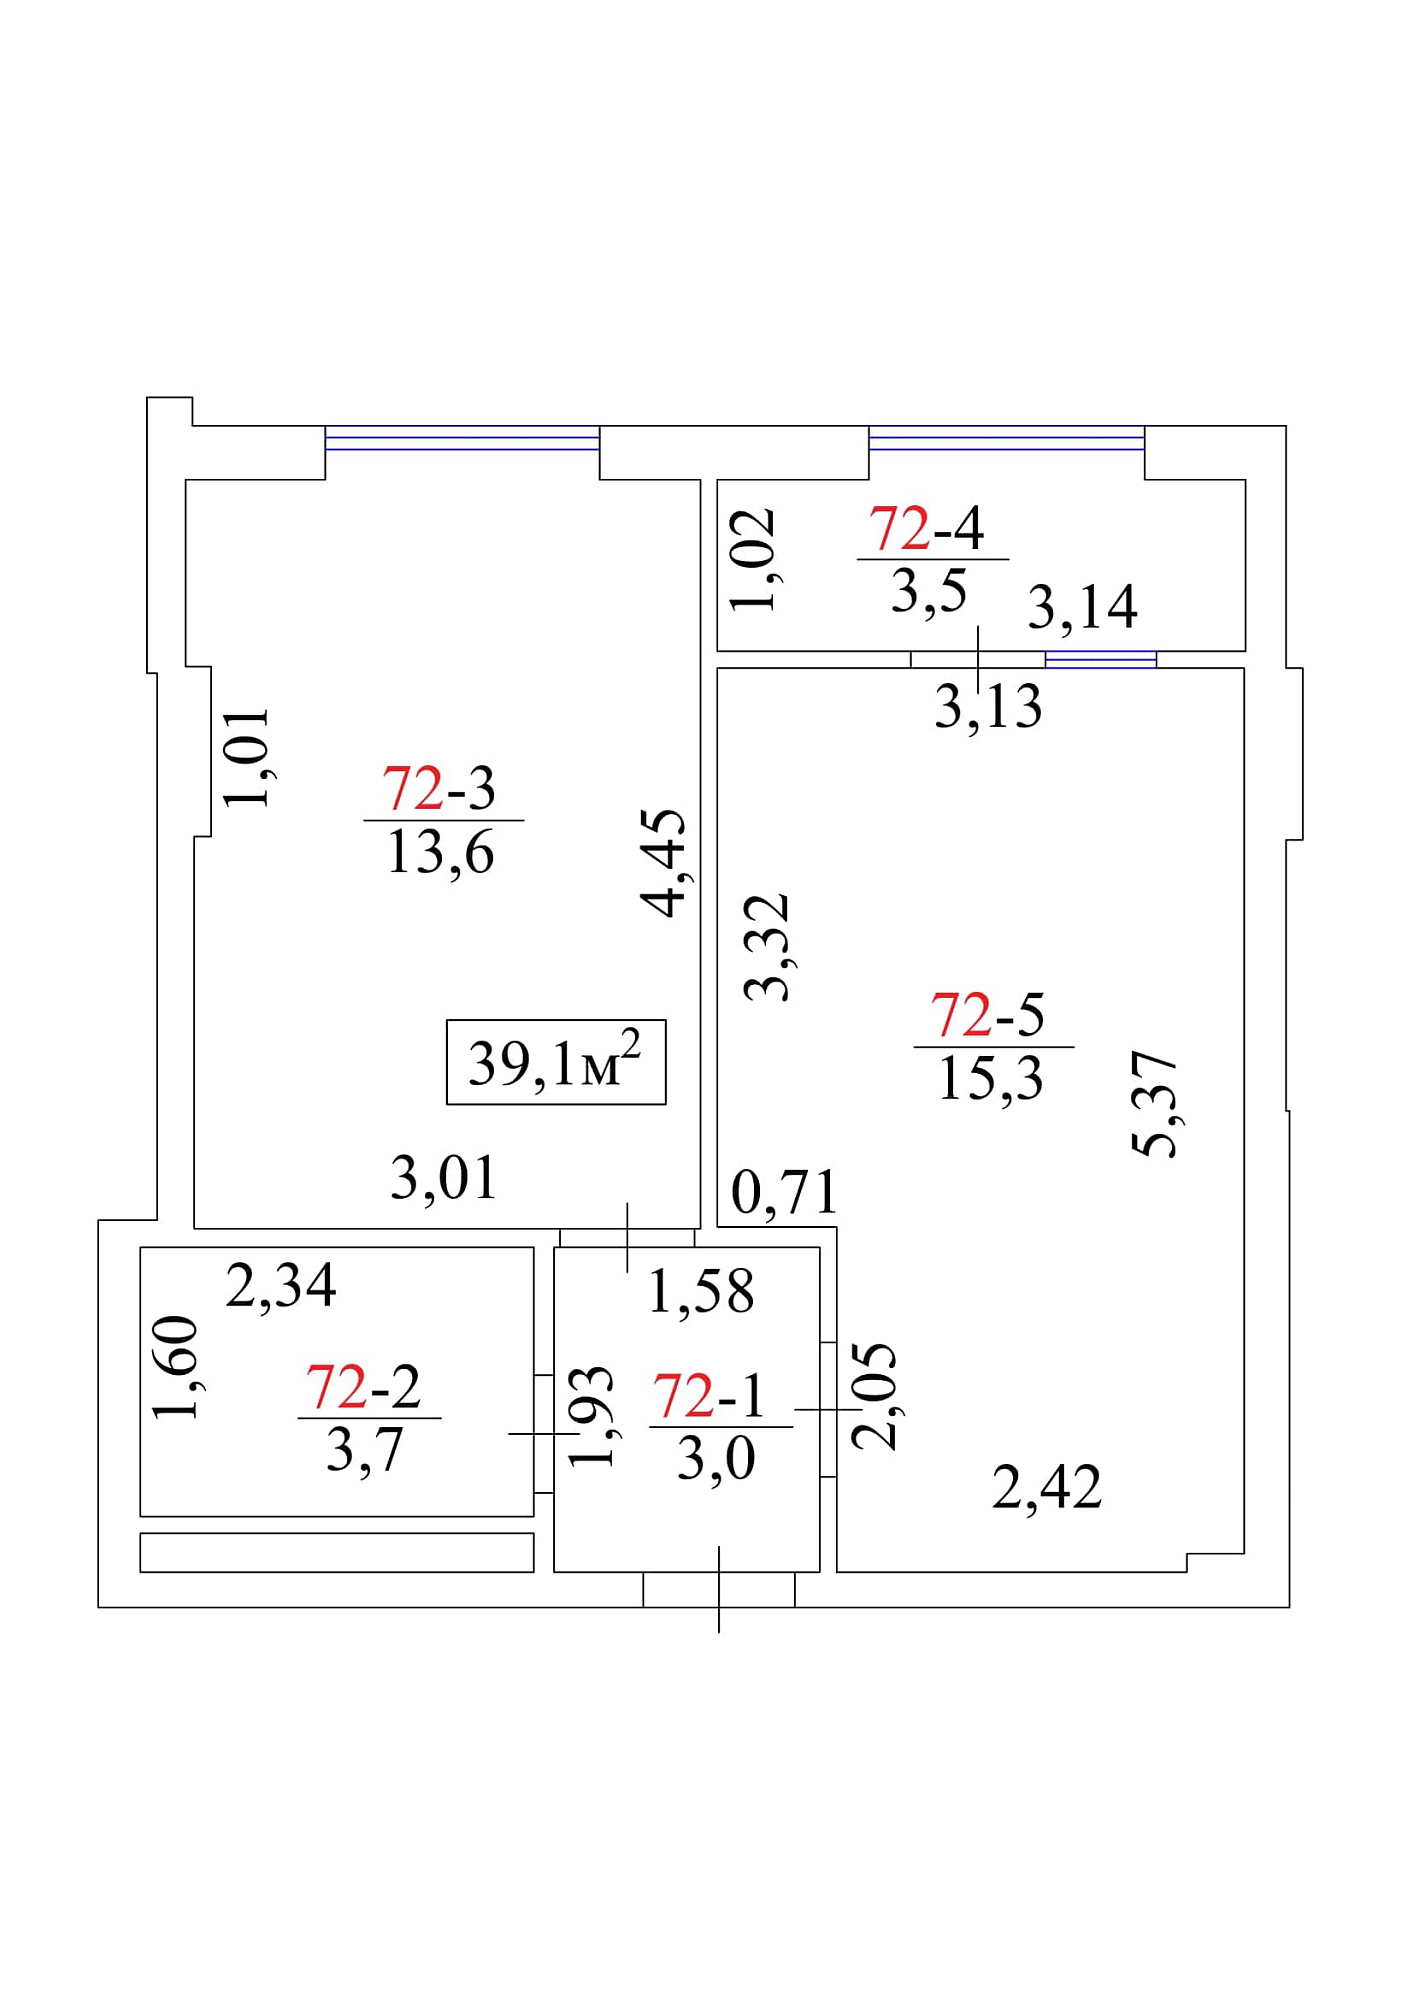 Planning 1-rm flats area 39.1m2, AB-01-08/00068.